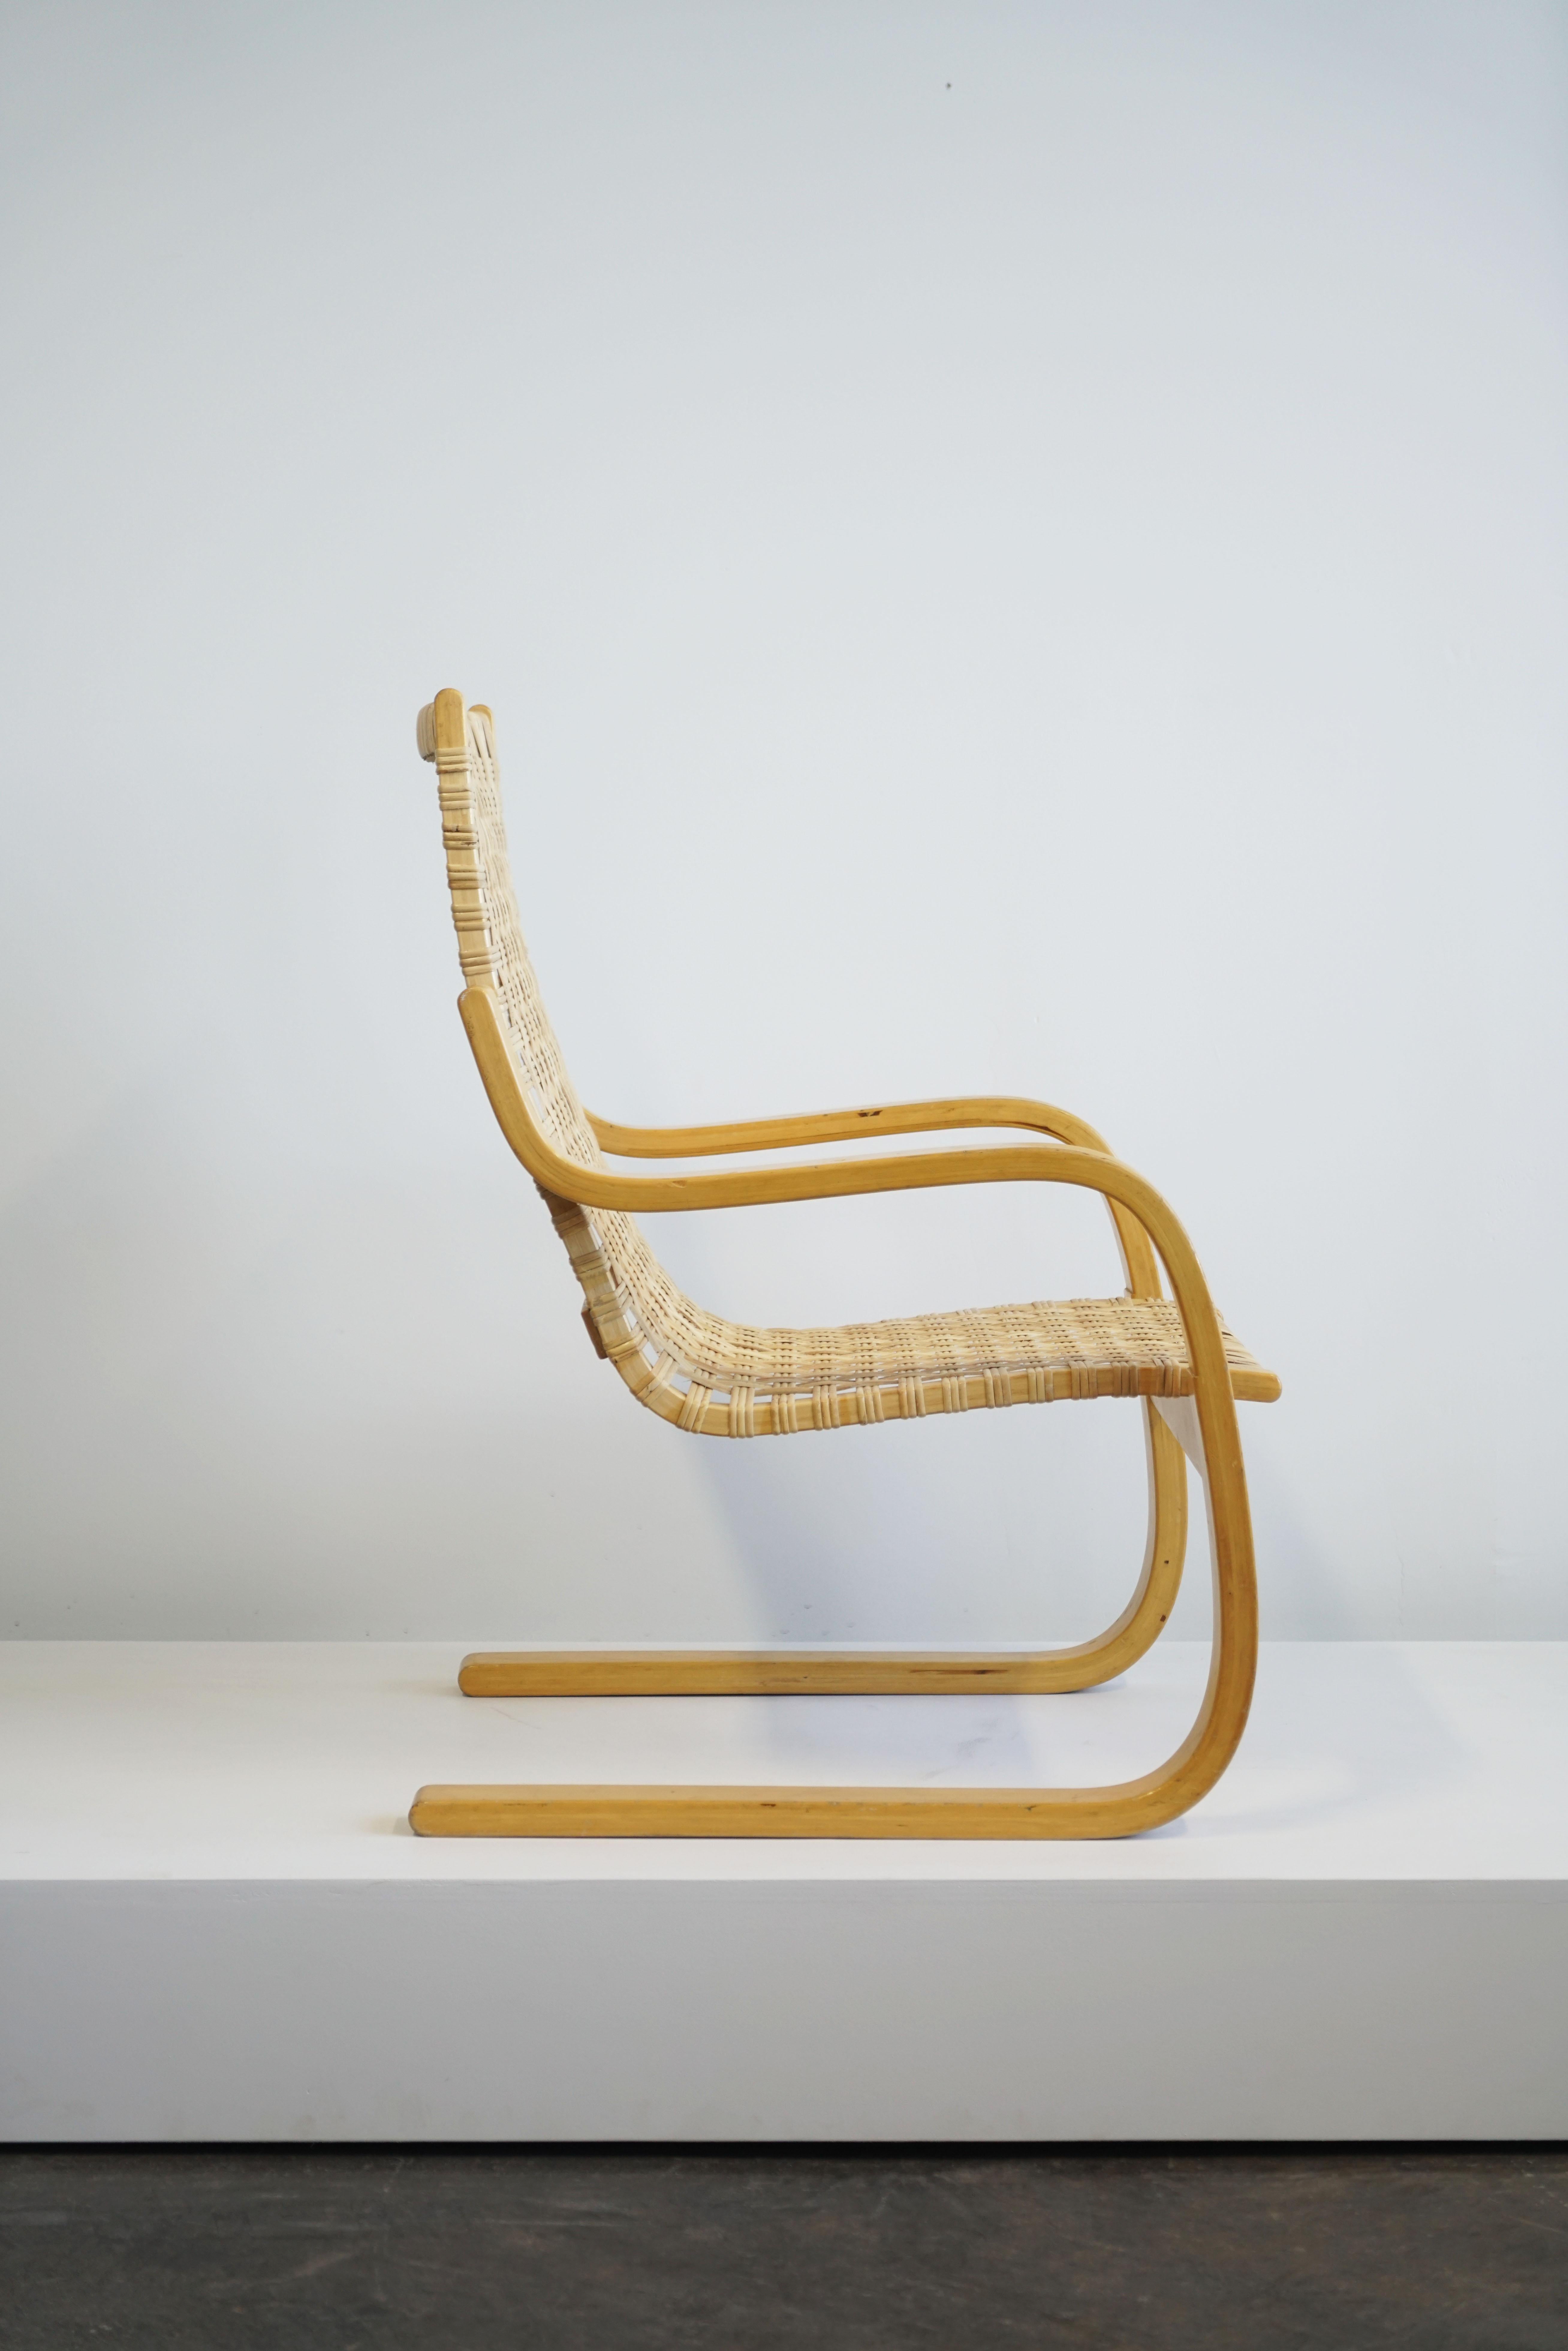 Finnish 1960 Alvar Aalto Cantilever Chair Model 406 by Artek in Birch and Cane Webbing For Sale